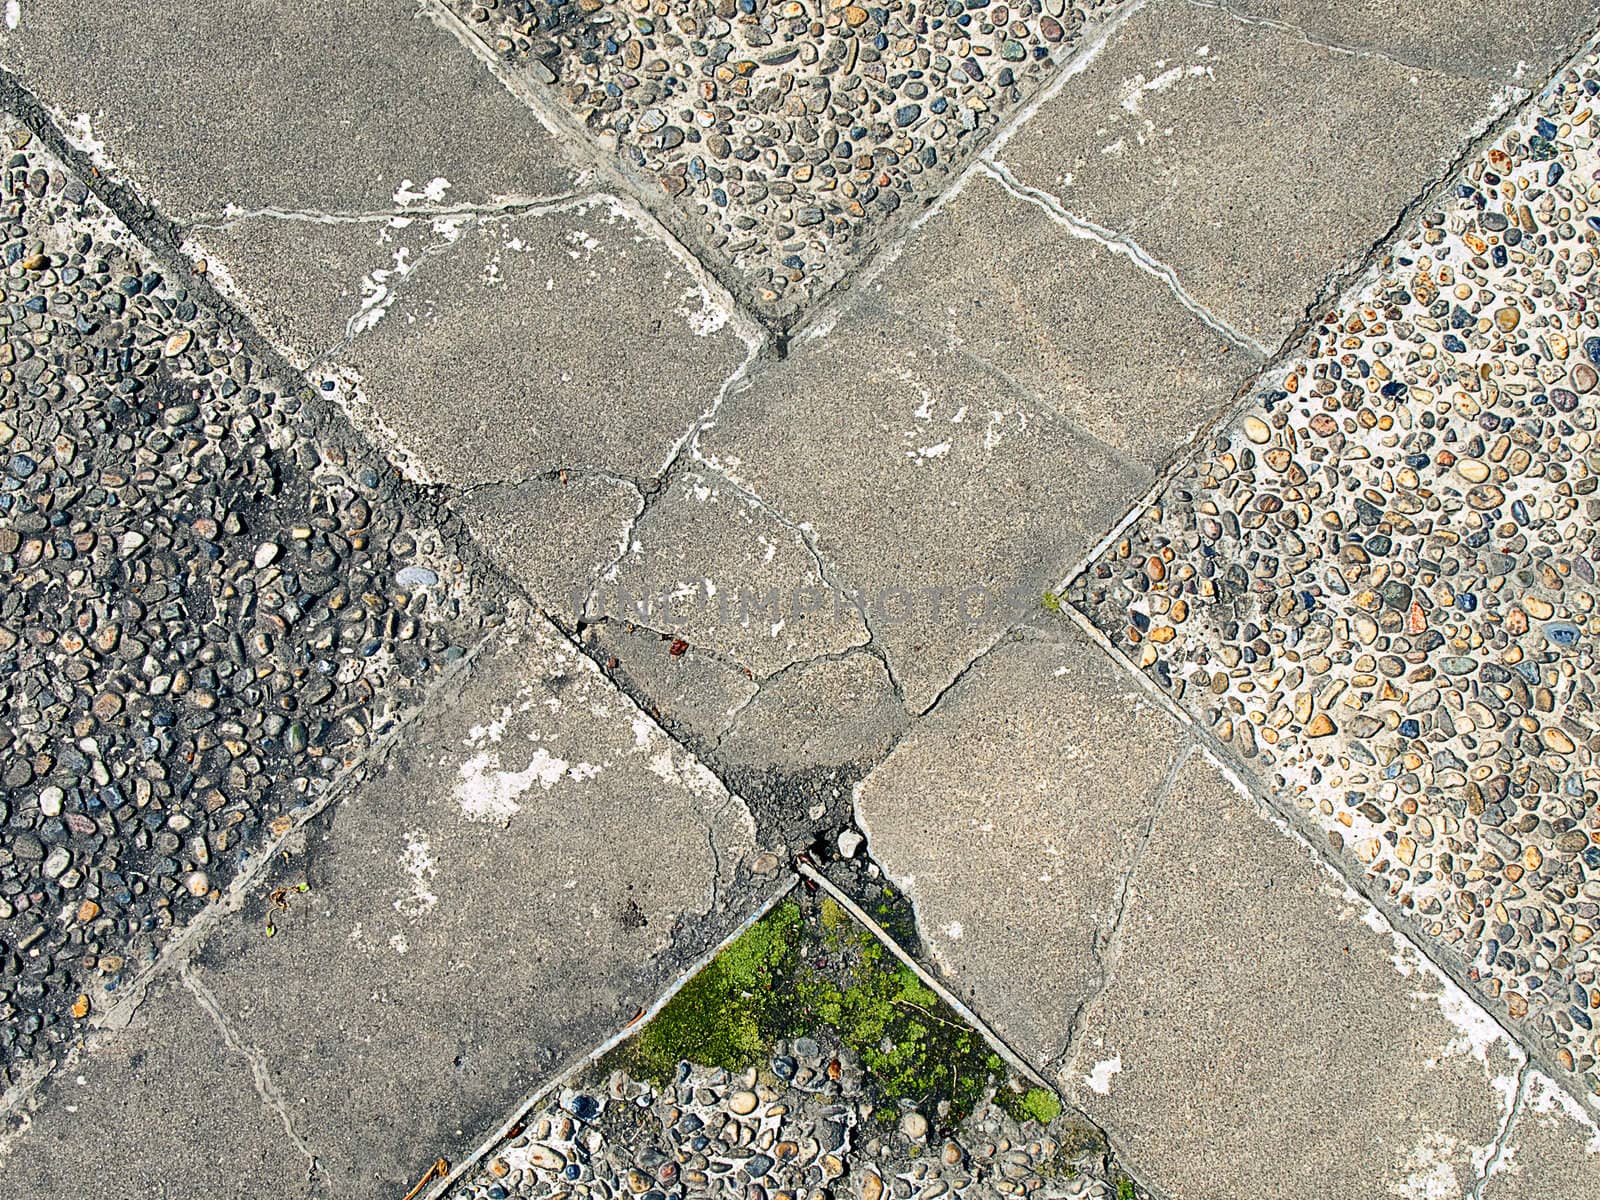 The letter X marks a spot on a concrete sidewalk.